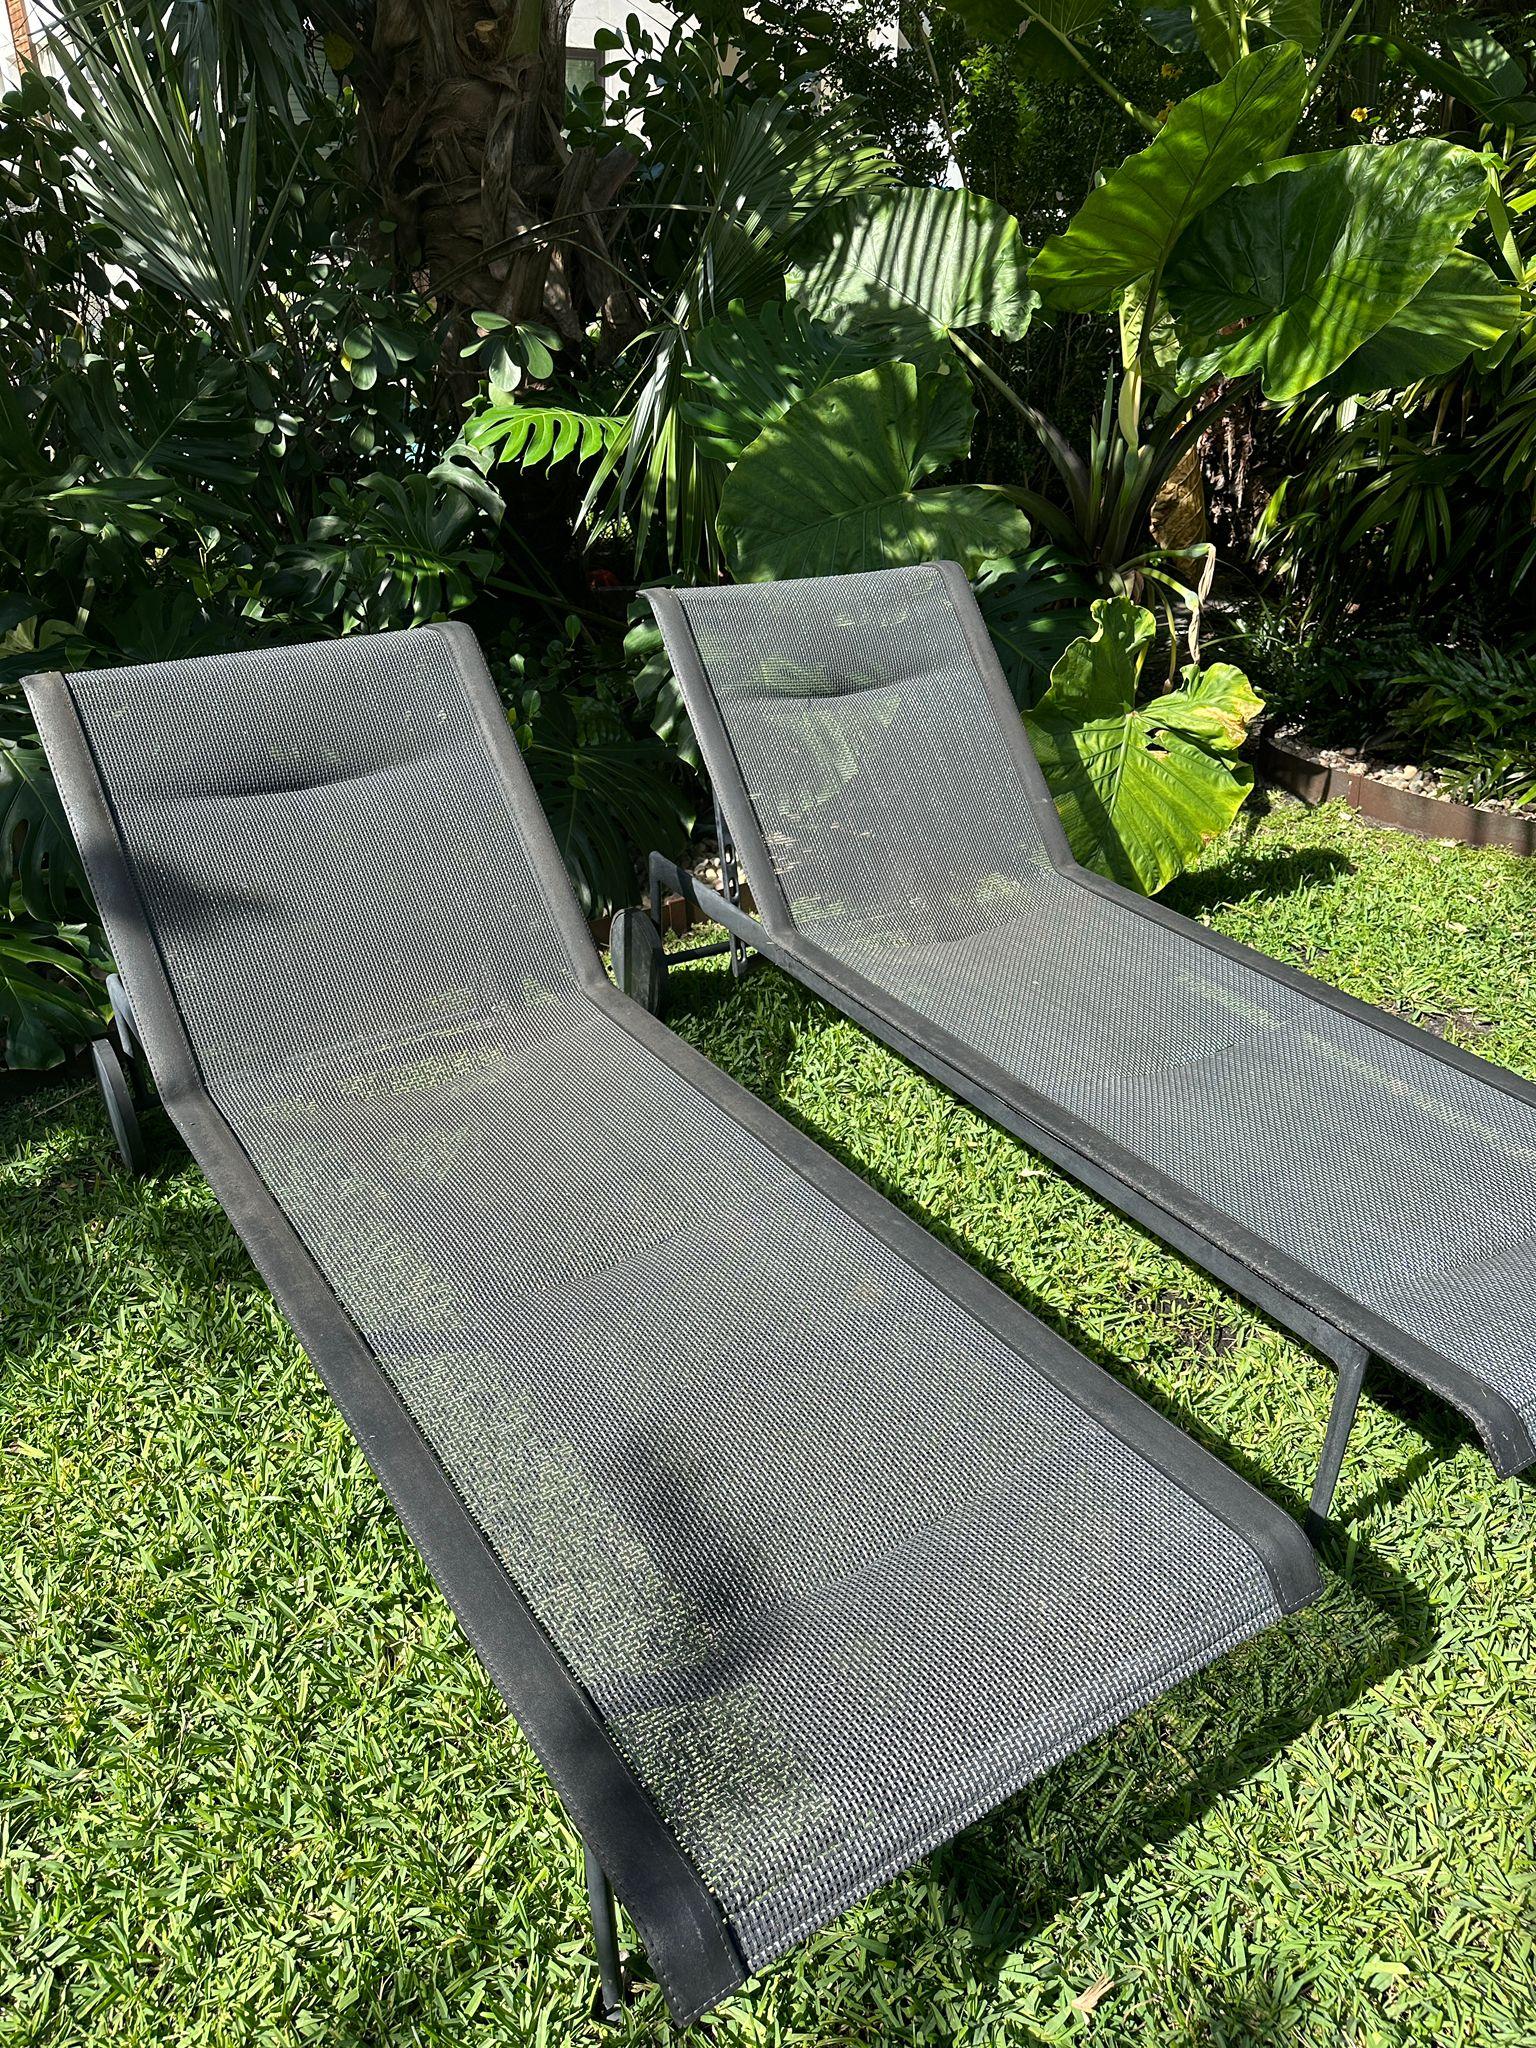 1966 Adjustable Chaise
Richard Schultz  1966
Richard Schultz's adjustable chaise lounge has been punctuating the patios, porches and pools of modern homes around the world for over 50 years. And it's never looked fresher.

Seat and back are woven